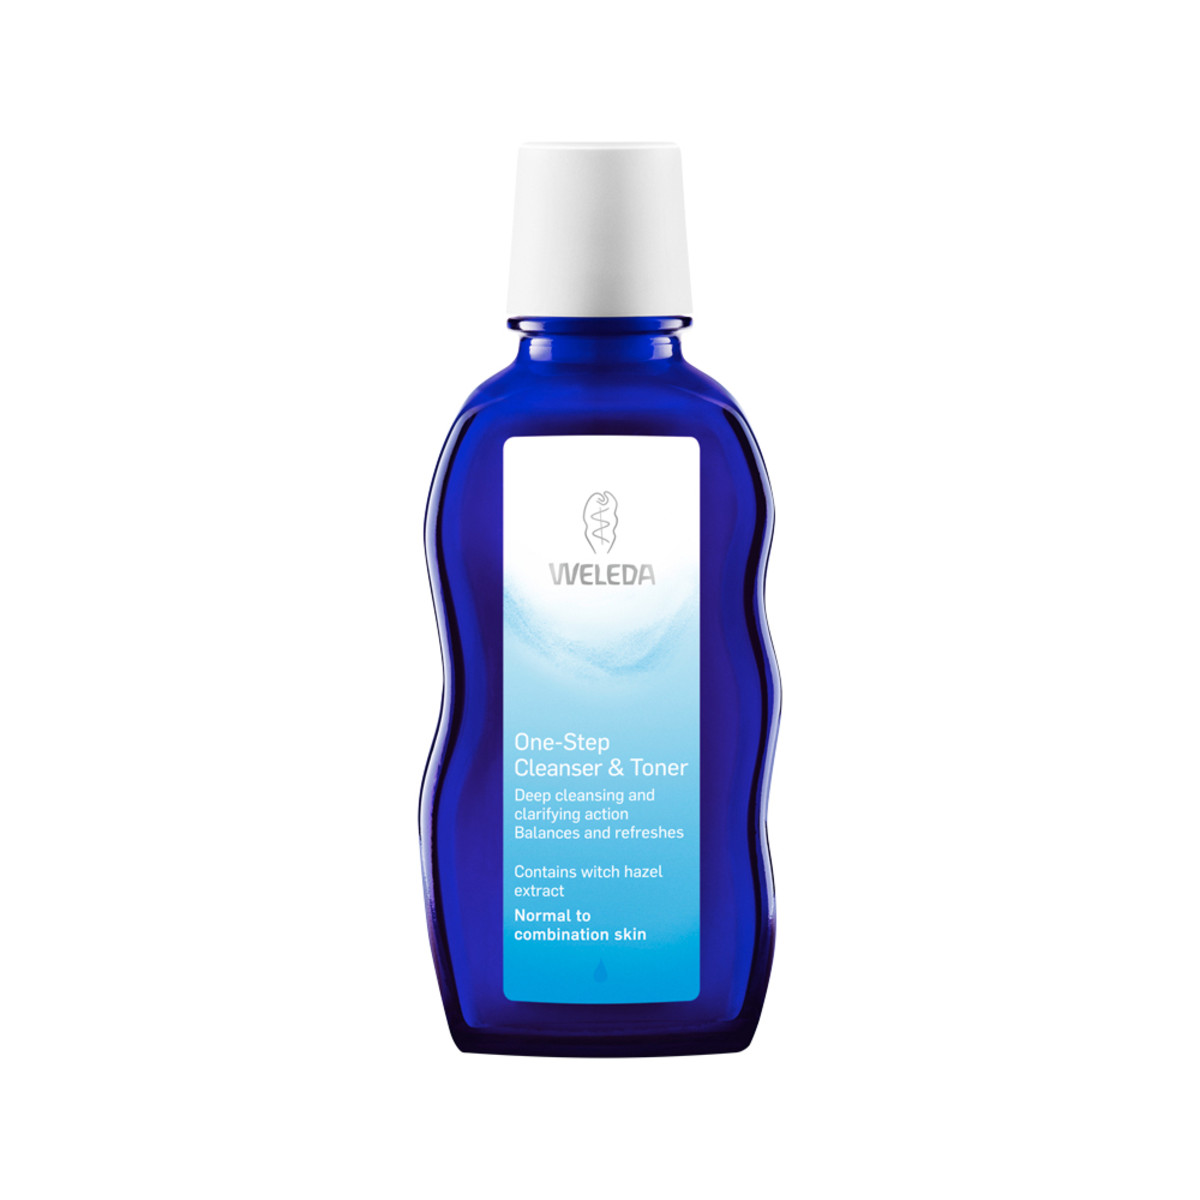 WELEDA - One-Step Cleanser & Toner (Normal to Combination Skin) with Organic Witch Hazel